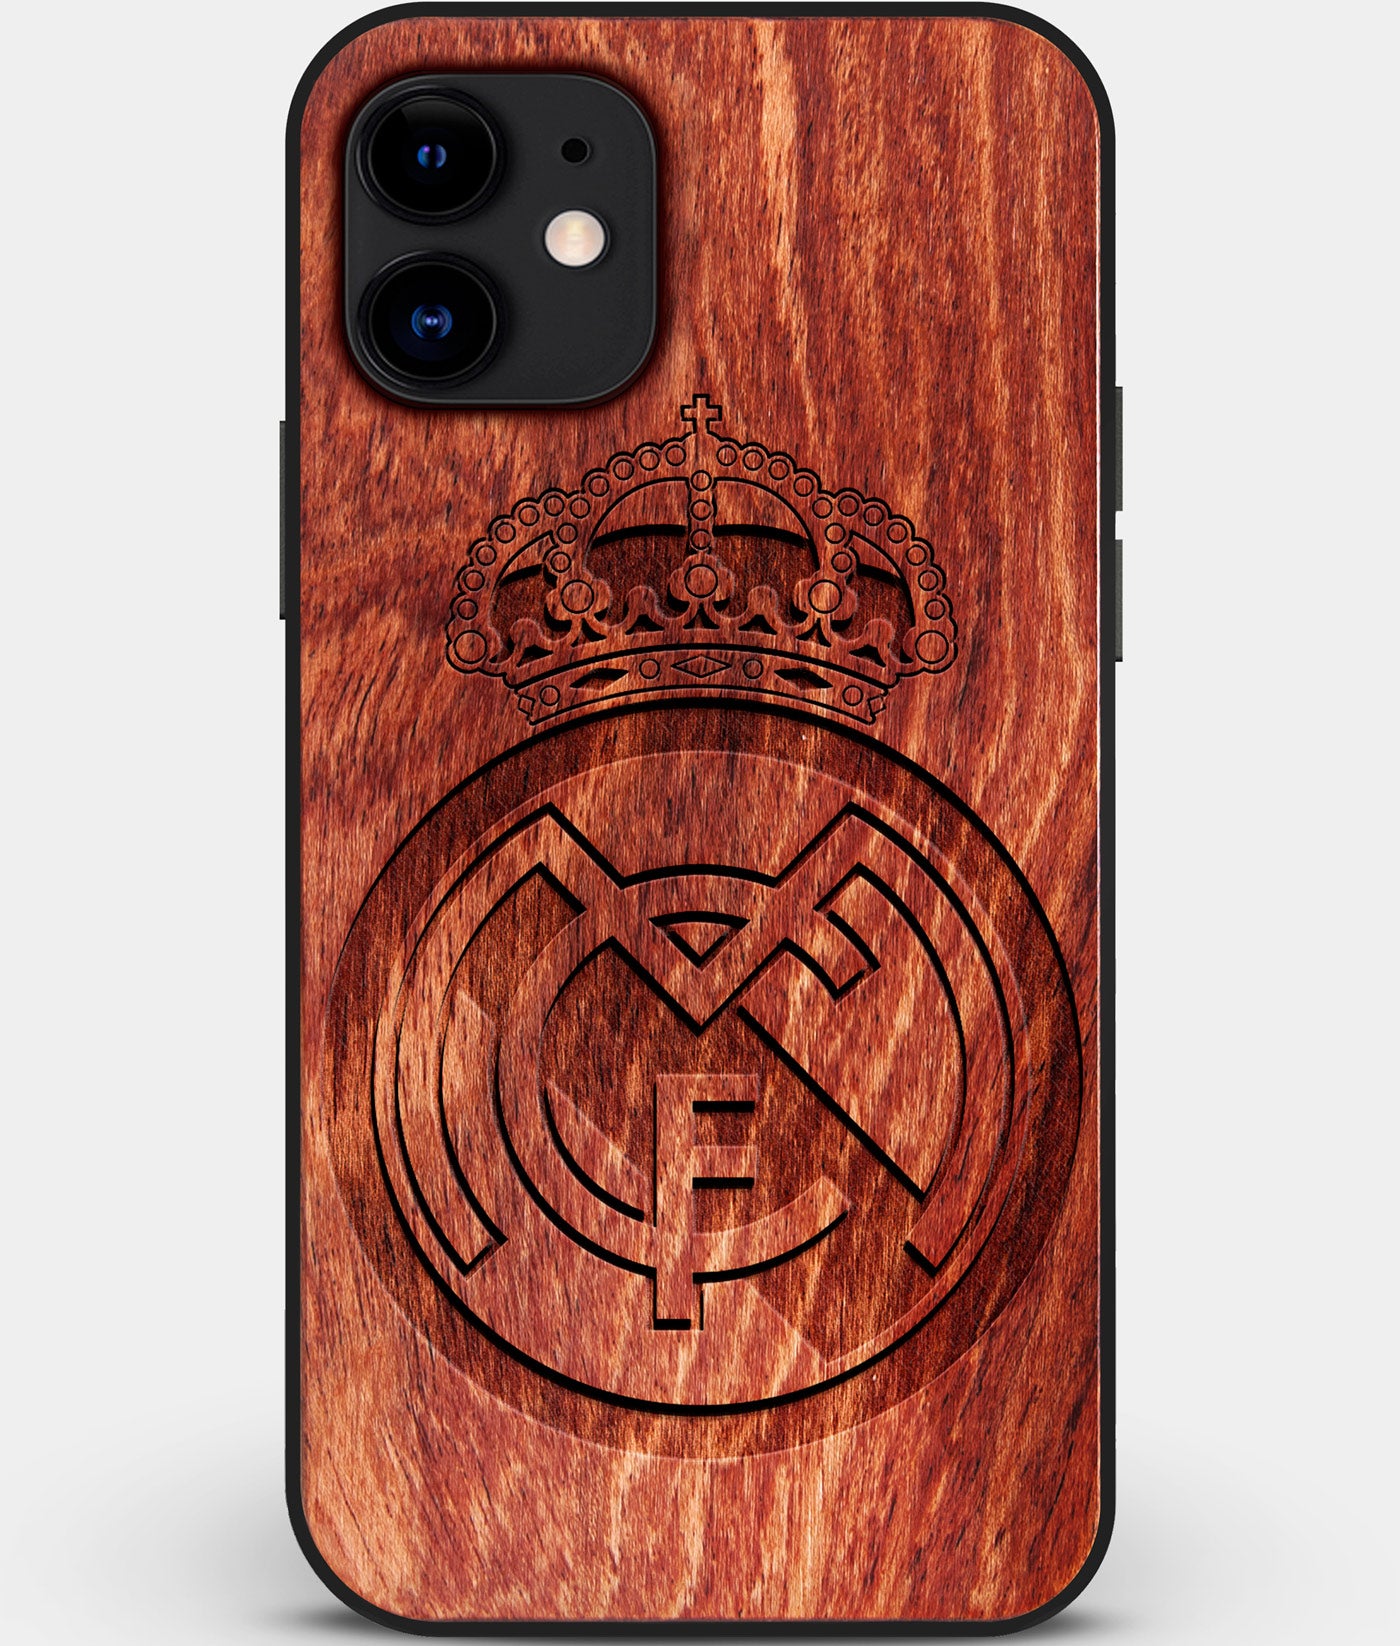 Custom Carved Wood Real Madrid C.F. iPhone 12 Case | Personalized Mahogany Wood Real Madrid C.F. Cover, Birthday Gift, Gifts For Him, Monogrammed Gift For Fan | by Engraved In Nature